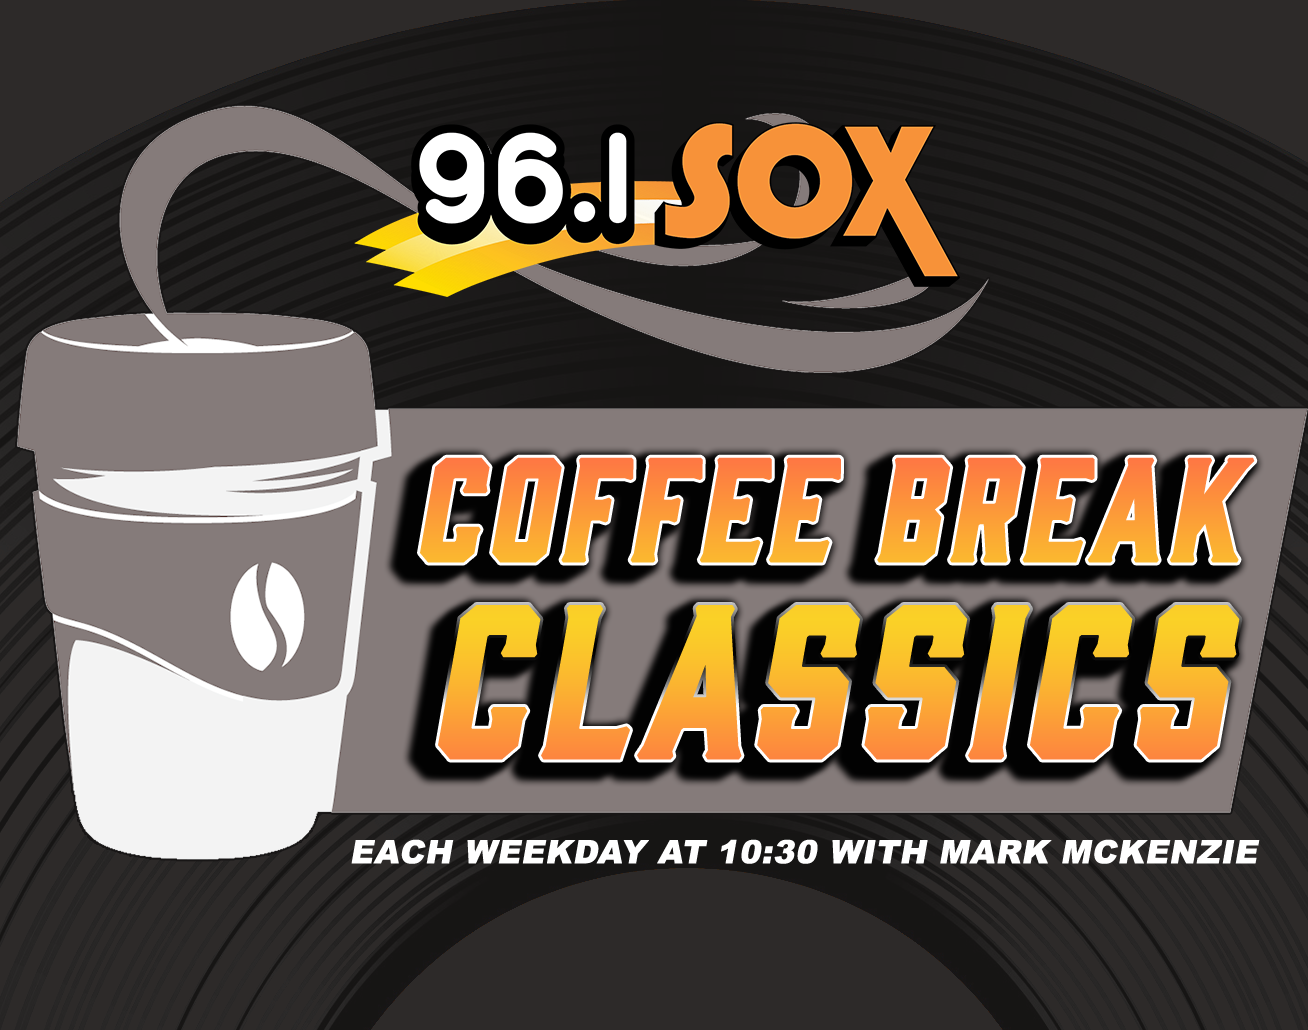 Get your Workday going with Coffee Break Classics on 96.1 SOX